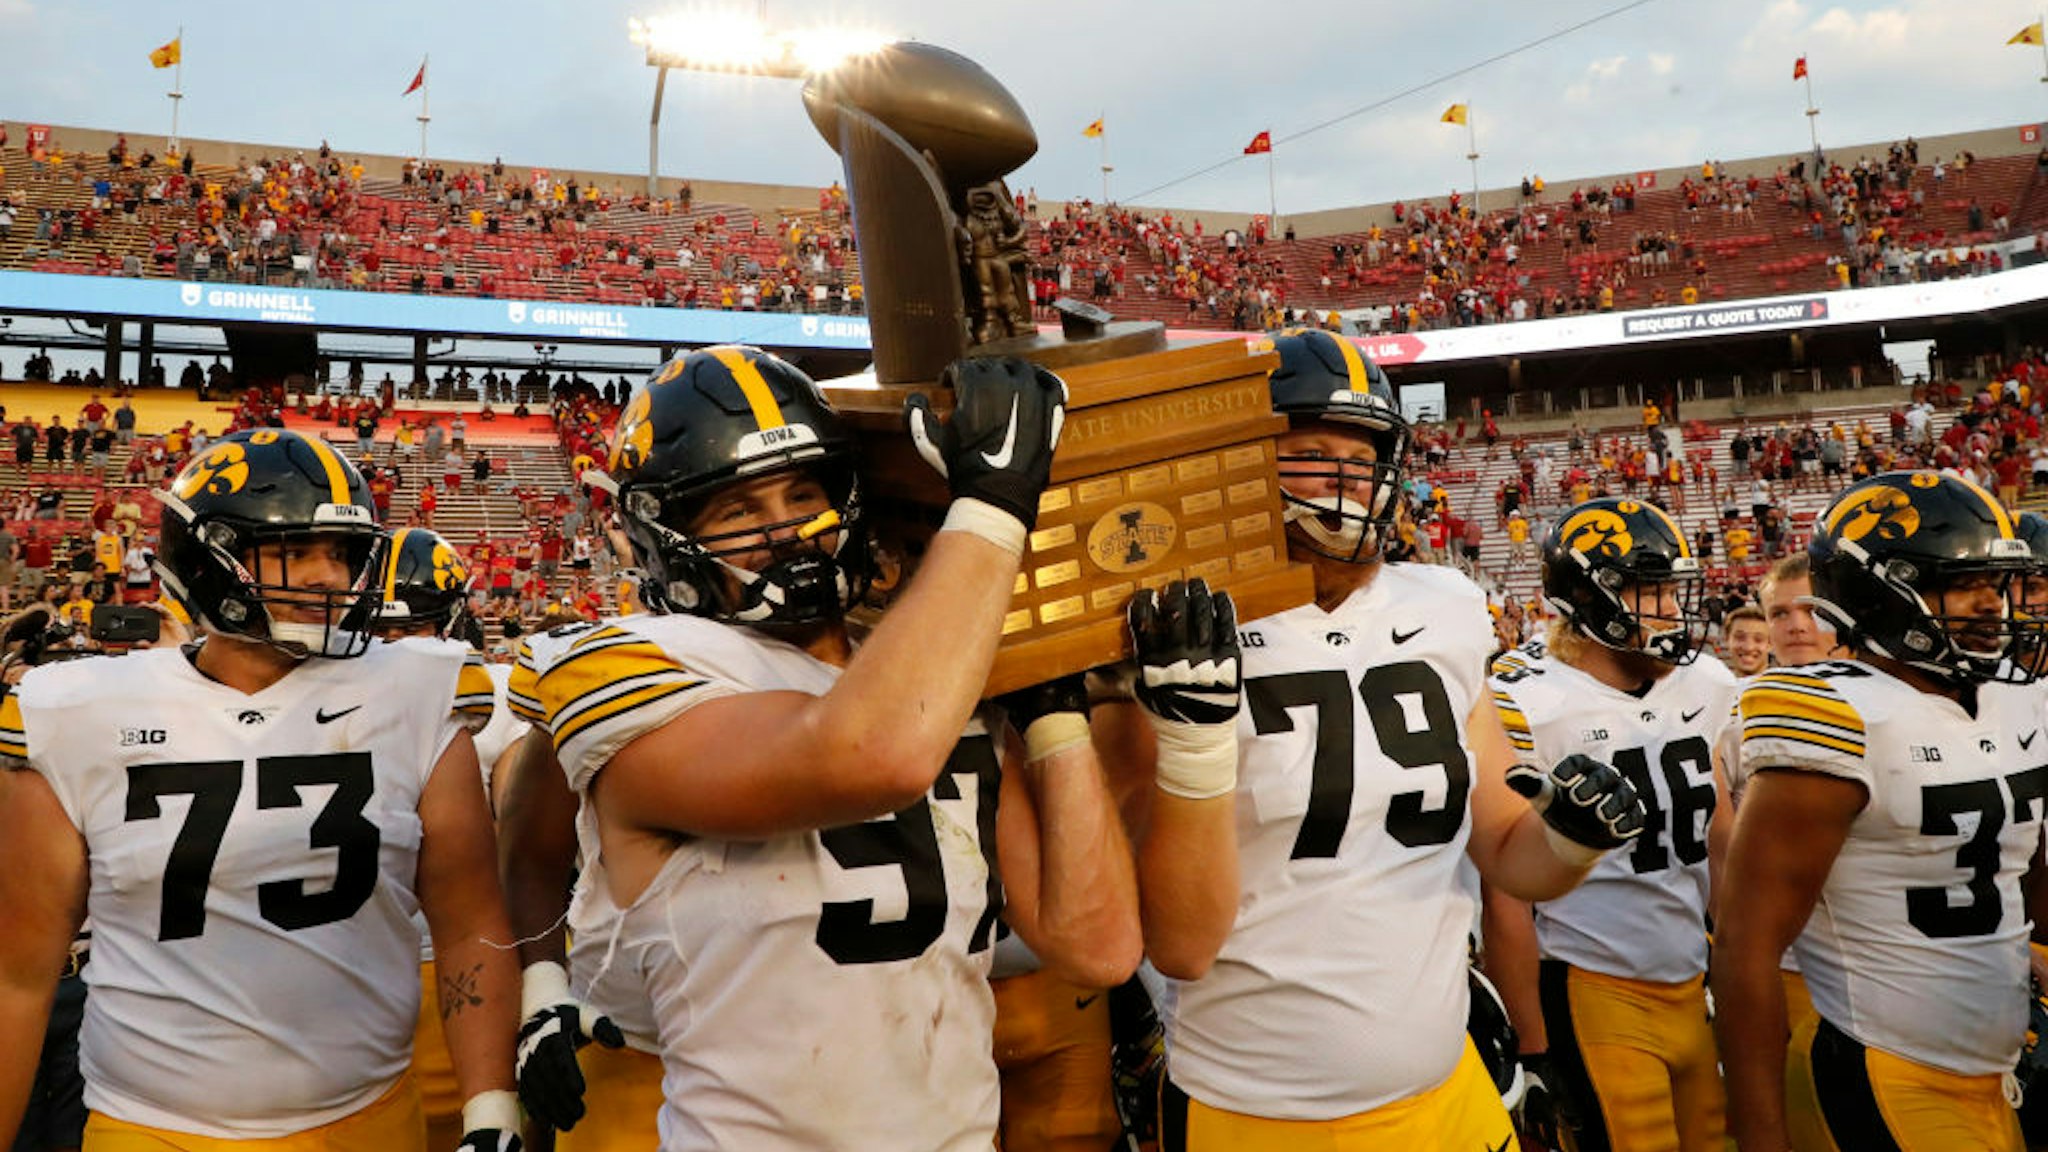 AMES, IA - SEPTEMBER 11: Defensive lineman Zach VanValkenburg #97 of the Iowa Hawkeyes and offensive lineman Jack Plumb #79 of the Iowa Hawkeyes carry the Cy-Hawk Trophy off the field after defeating the Iowa State Cyclones 27-17 at Jack Trice Stadium on September 11, 2021 in Ames, Iowa. The Iowa Hawkeyes won 27-17 over the Iowa State Cyclones. (Photo by David Purdy/Getty Images)